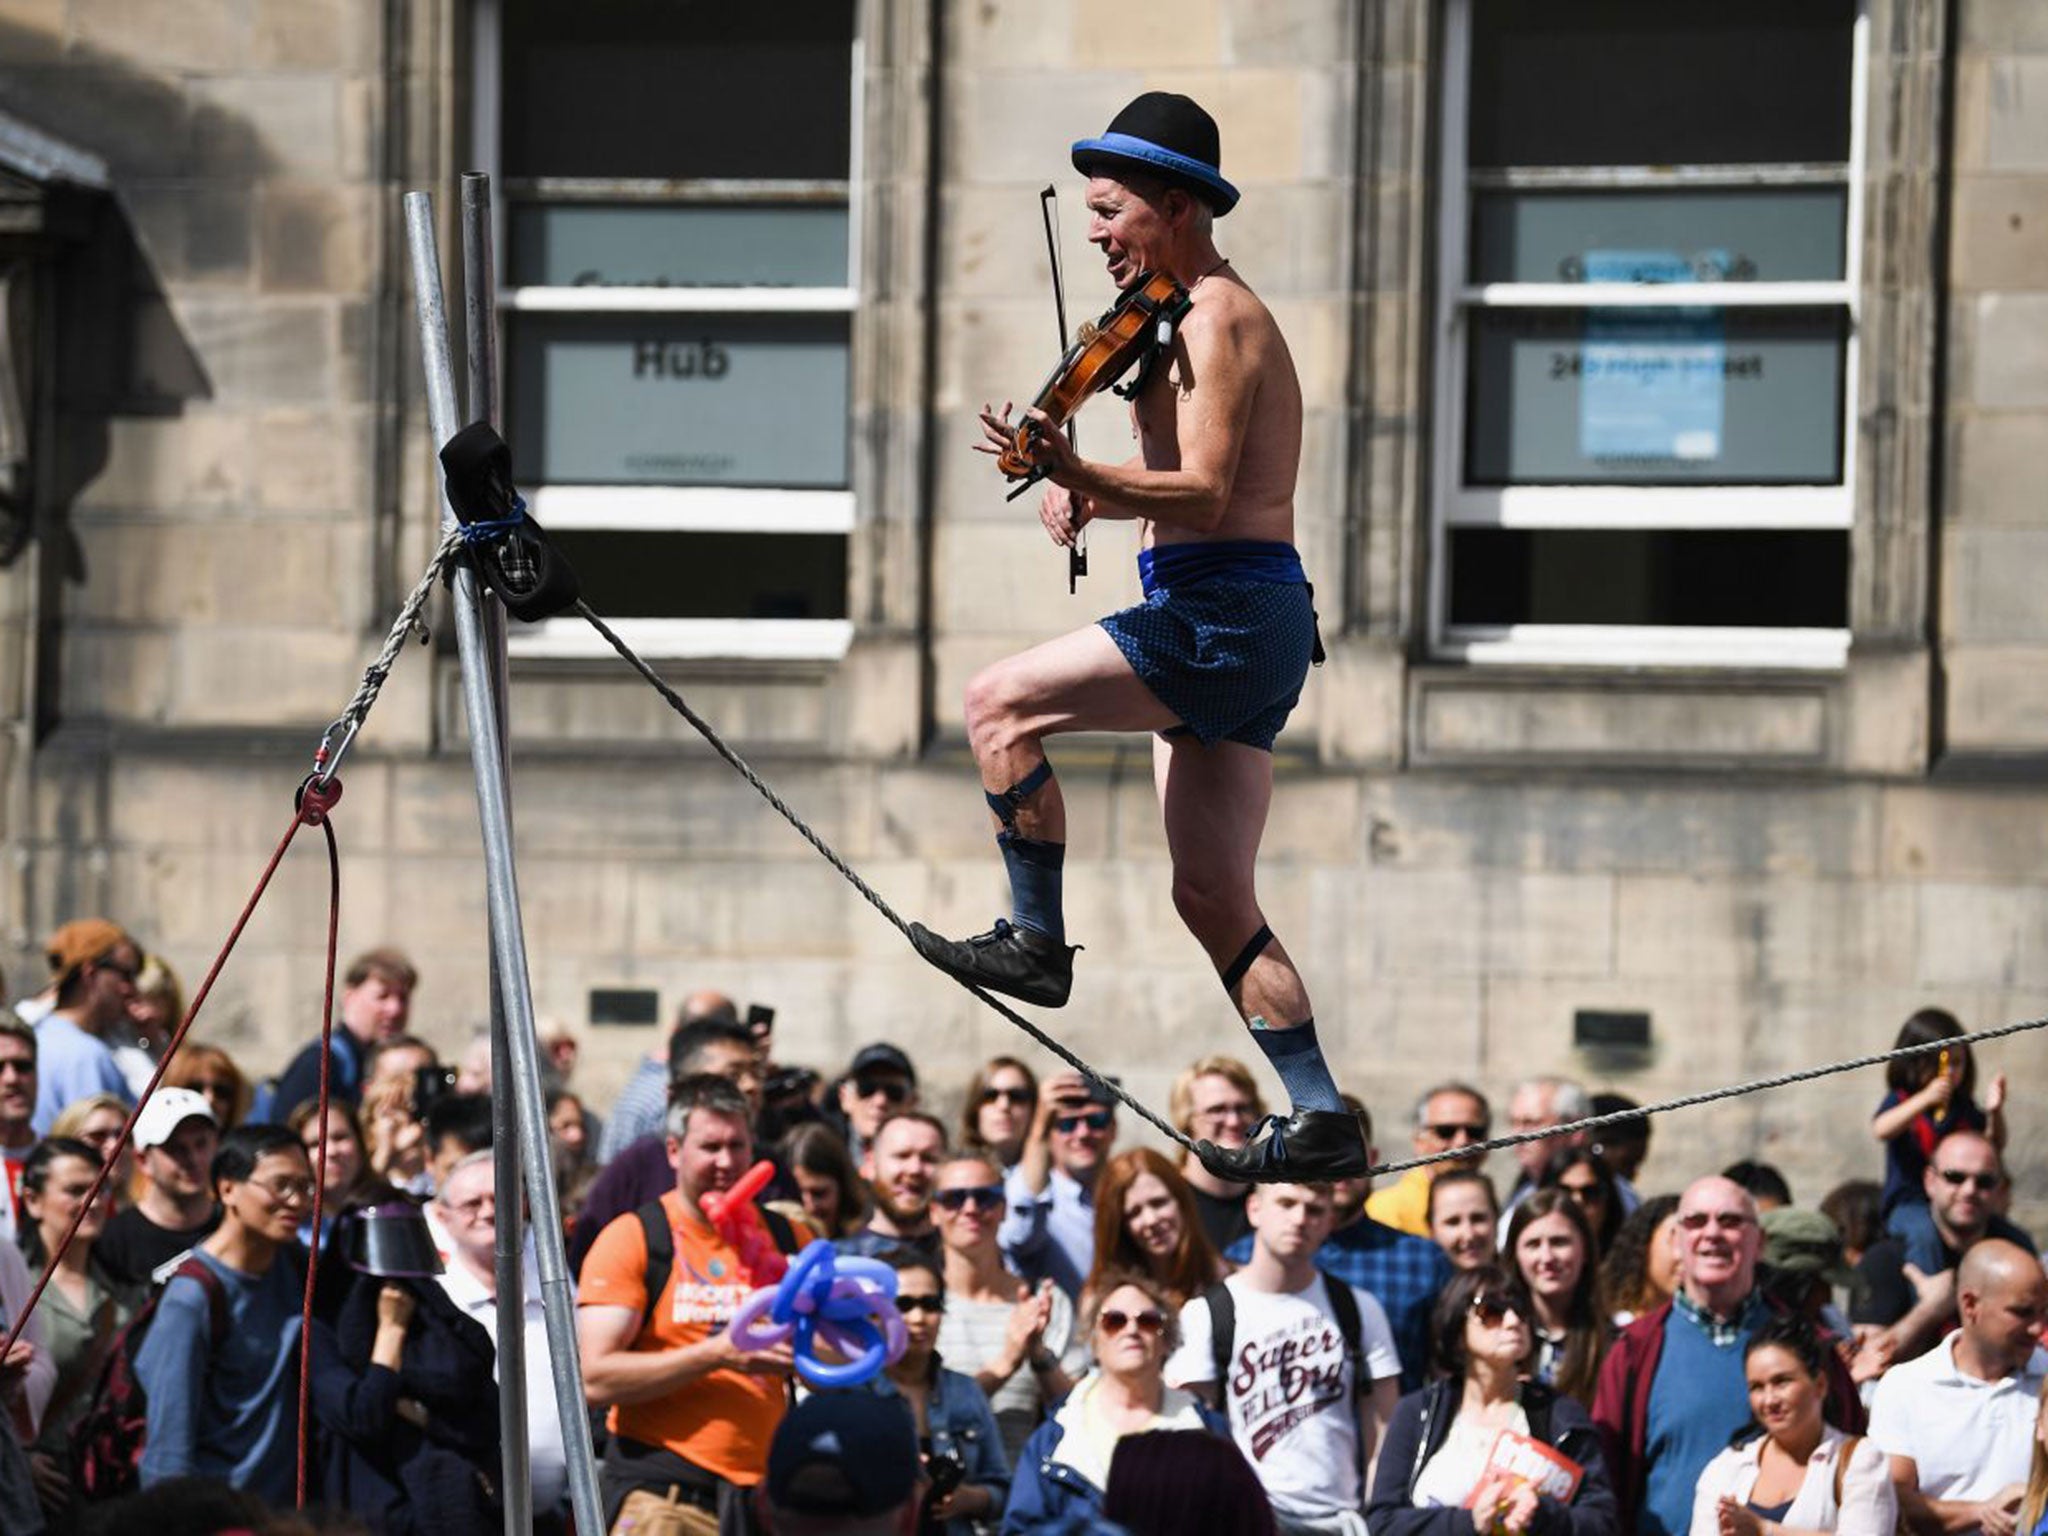 Aye wire: entertainment on the Royal Mile comes with a twist. And sock suspenders